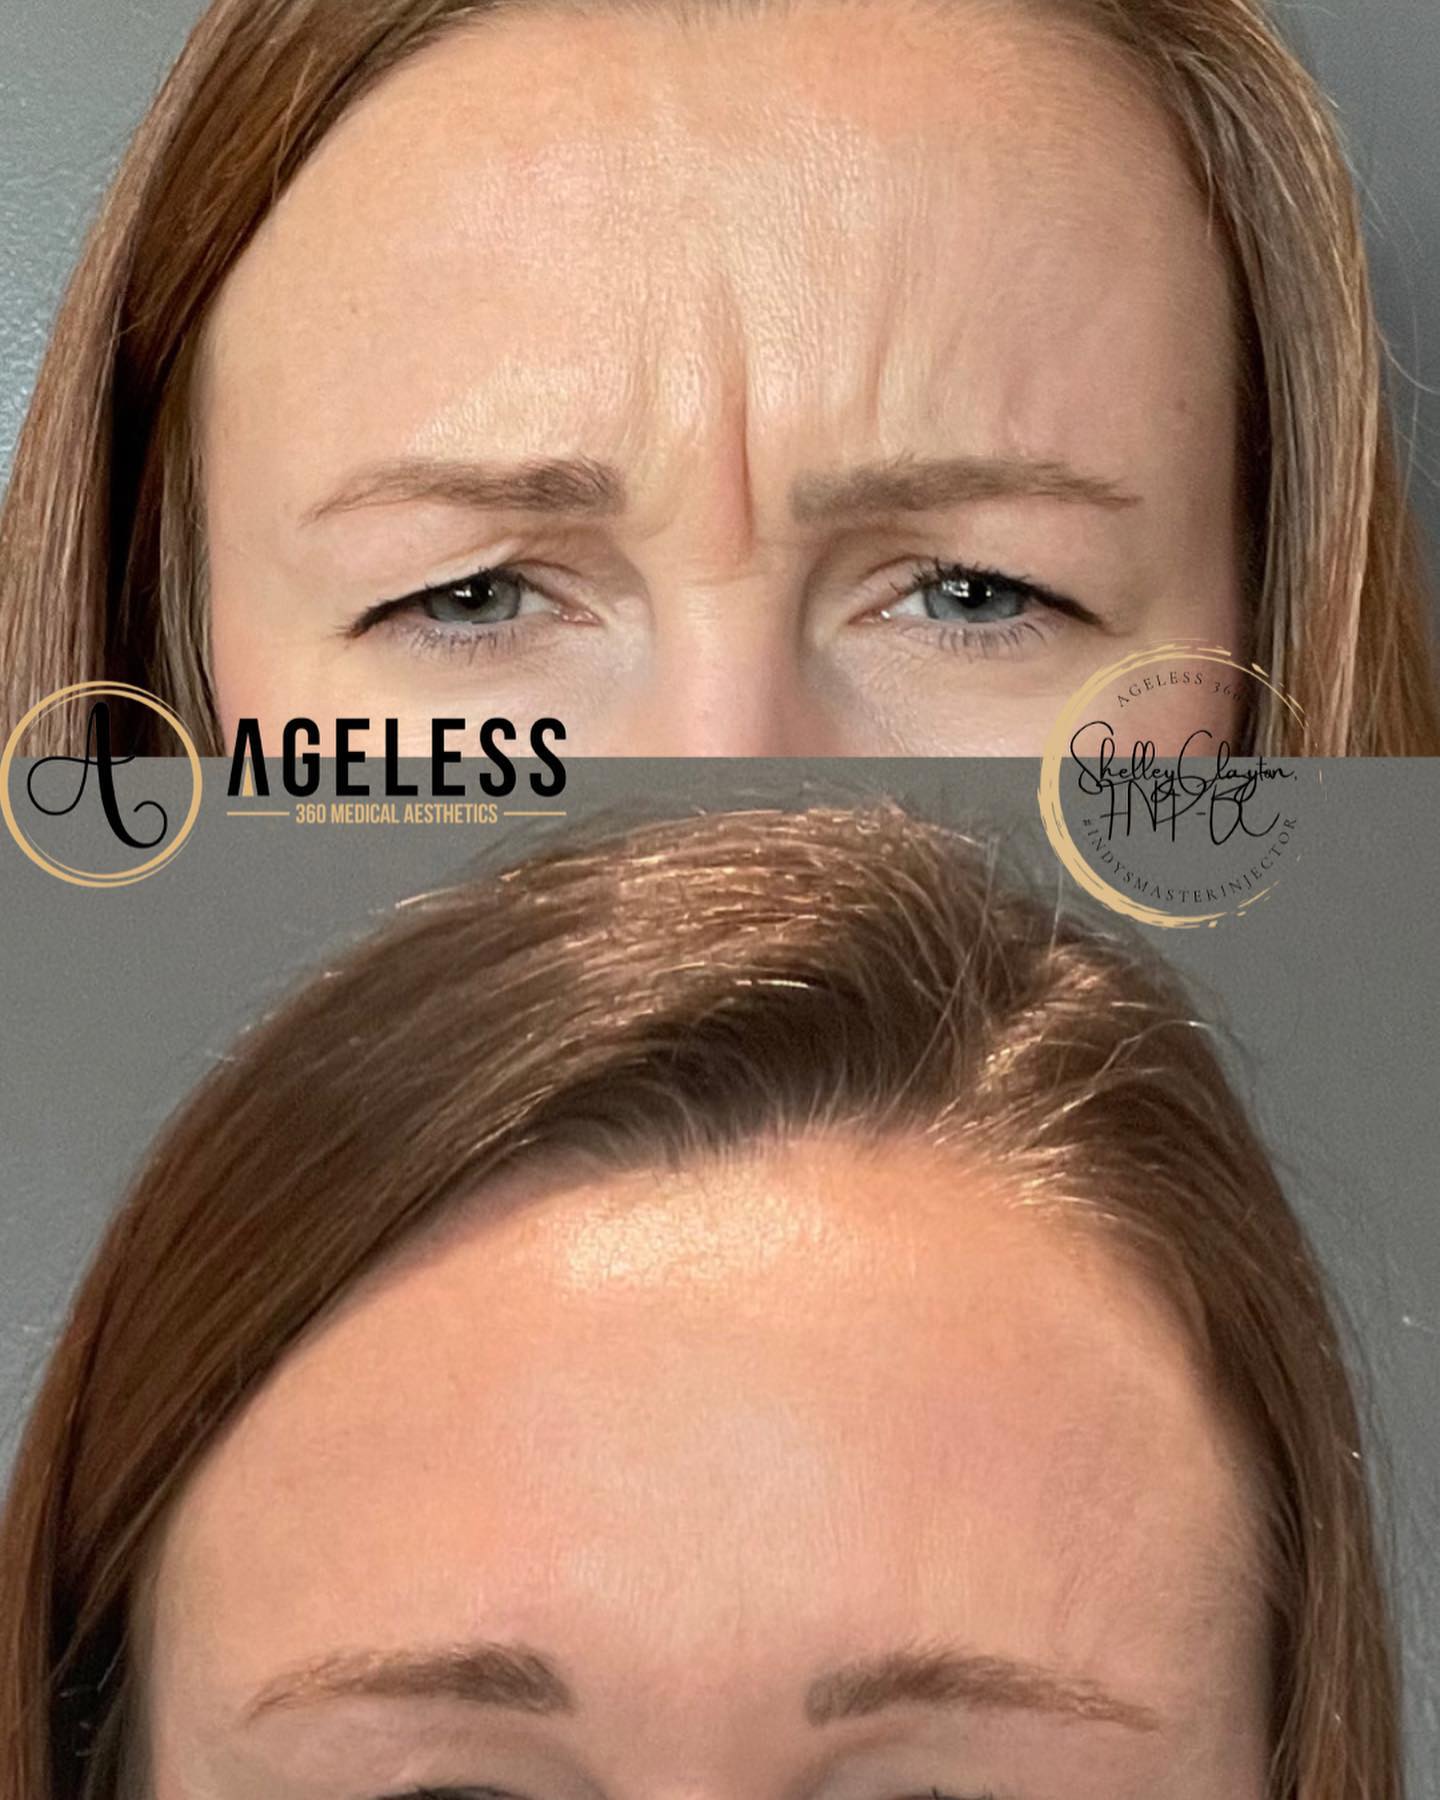 botox before and after